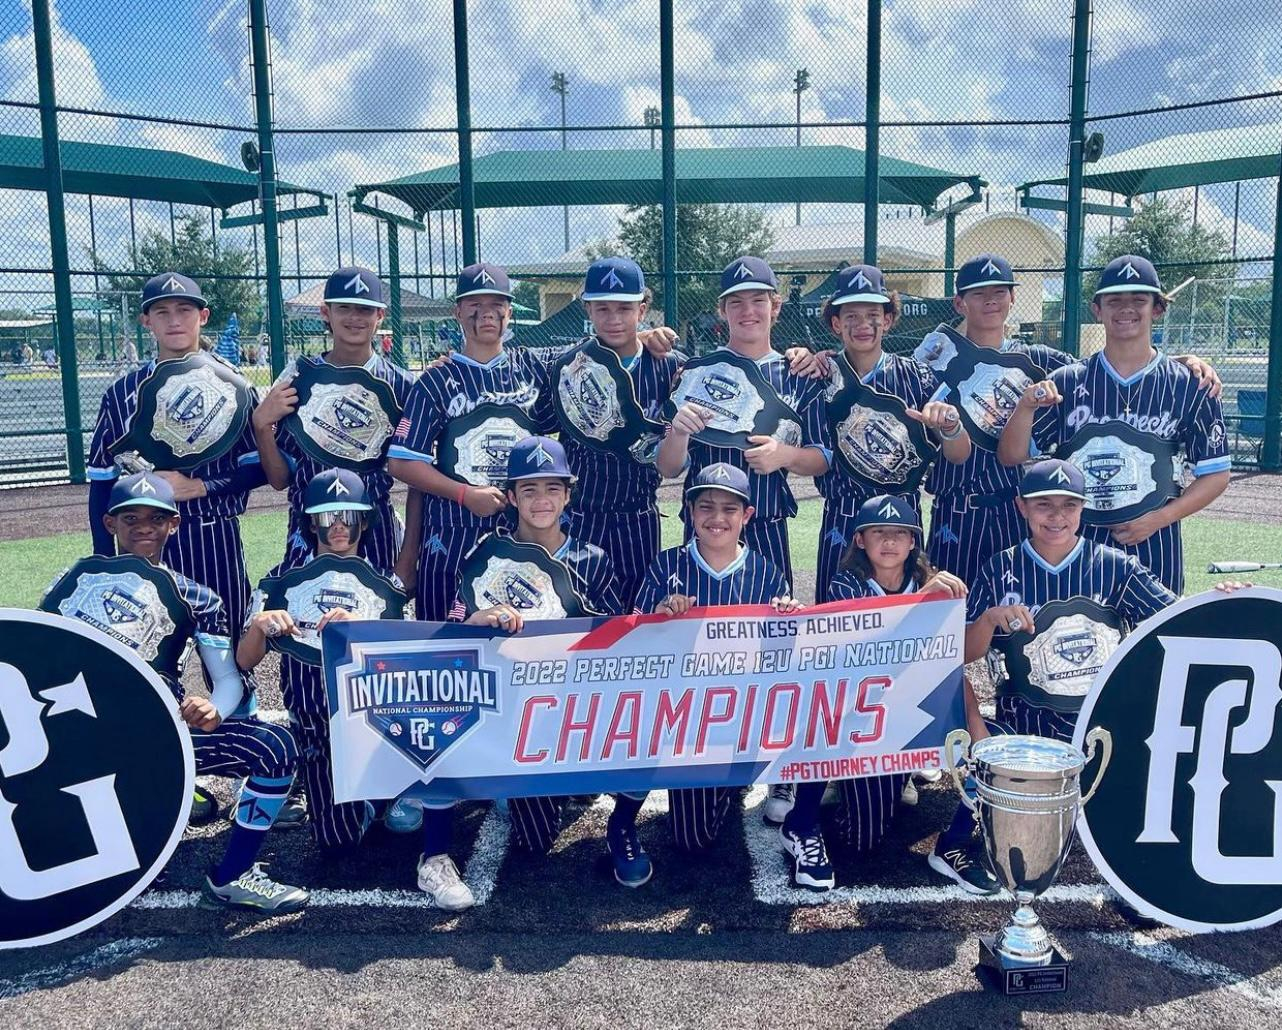 Youth baseball teams advance to national regional round